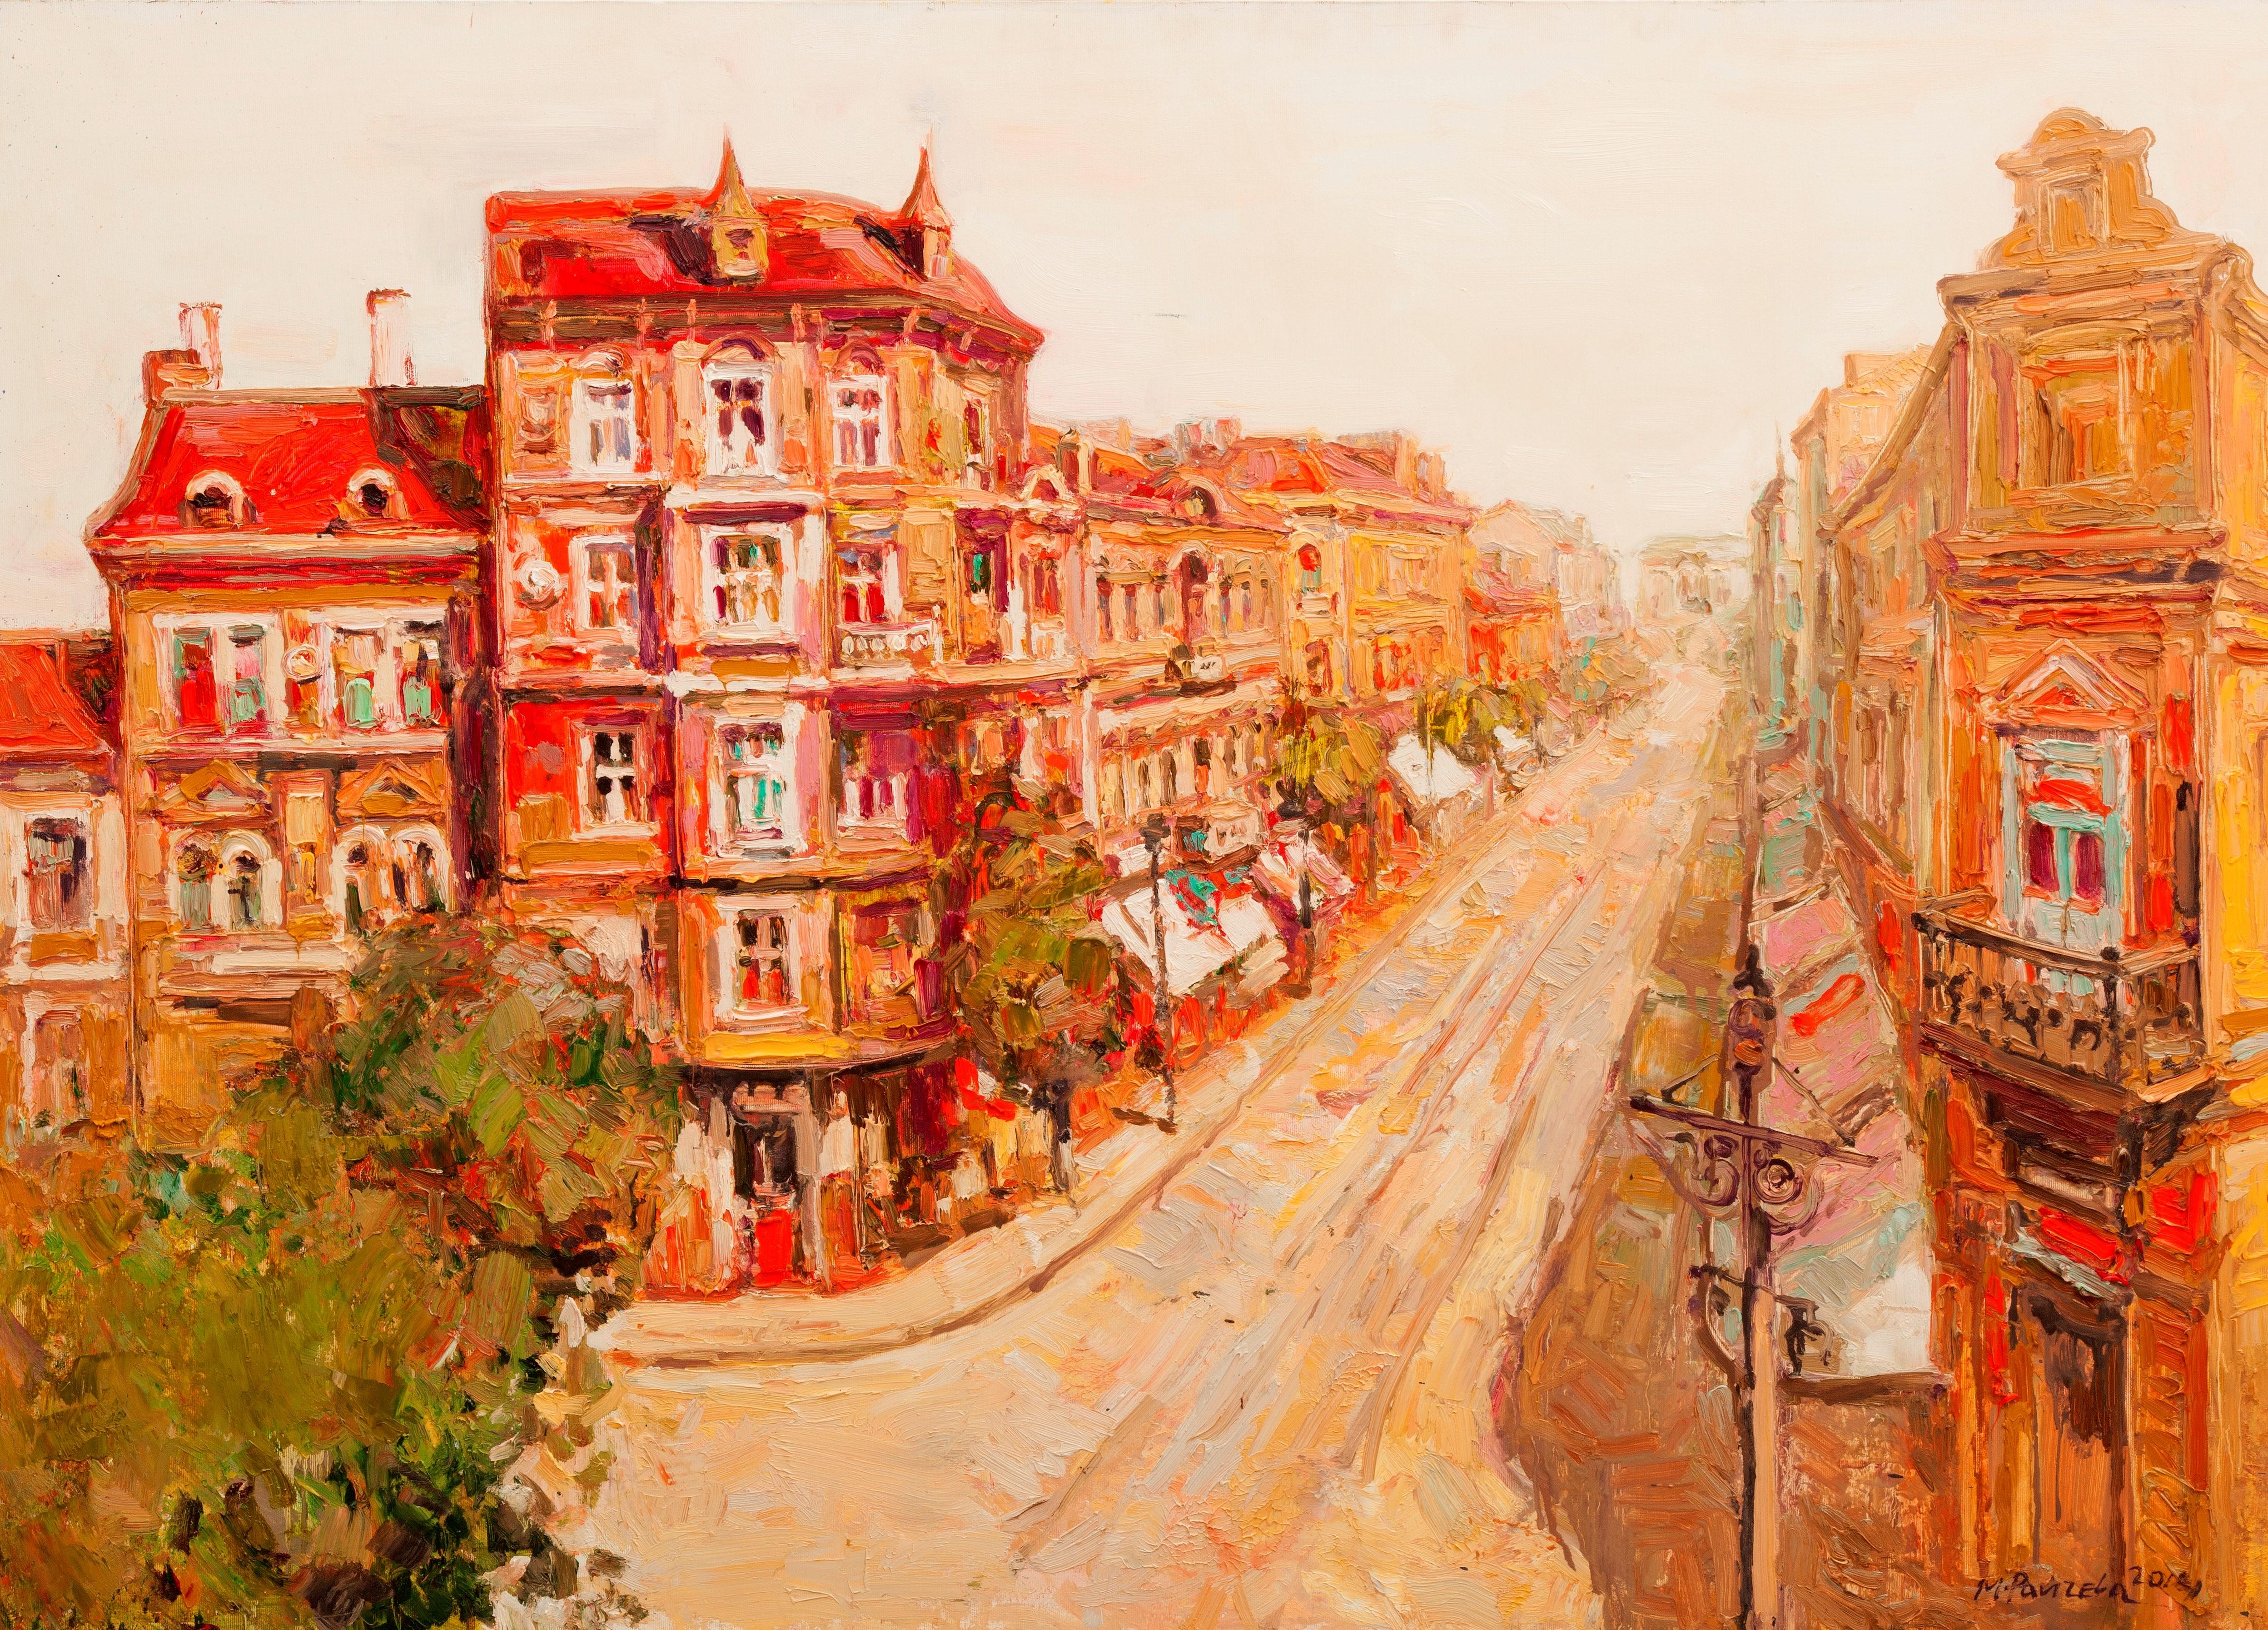 Maria Raycheva Landscape Painting - Sofia Boulevard - Landscape Oil Painting Colors Red Orange White Brown Pink